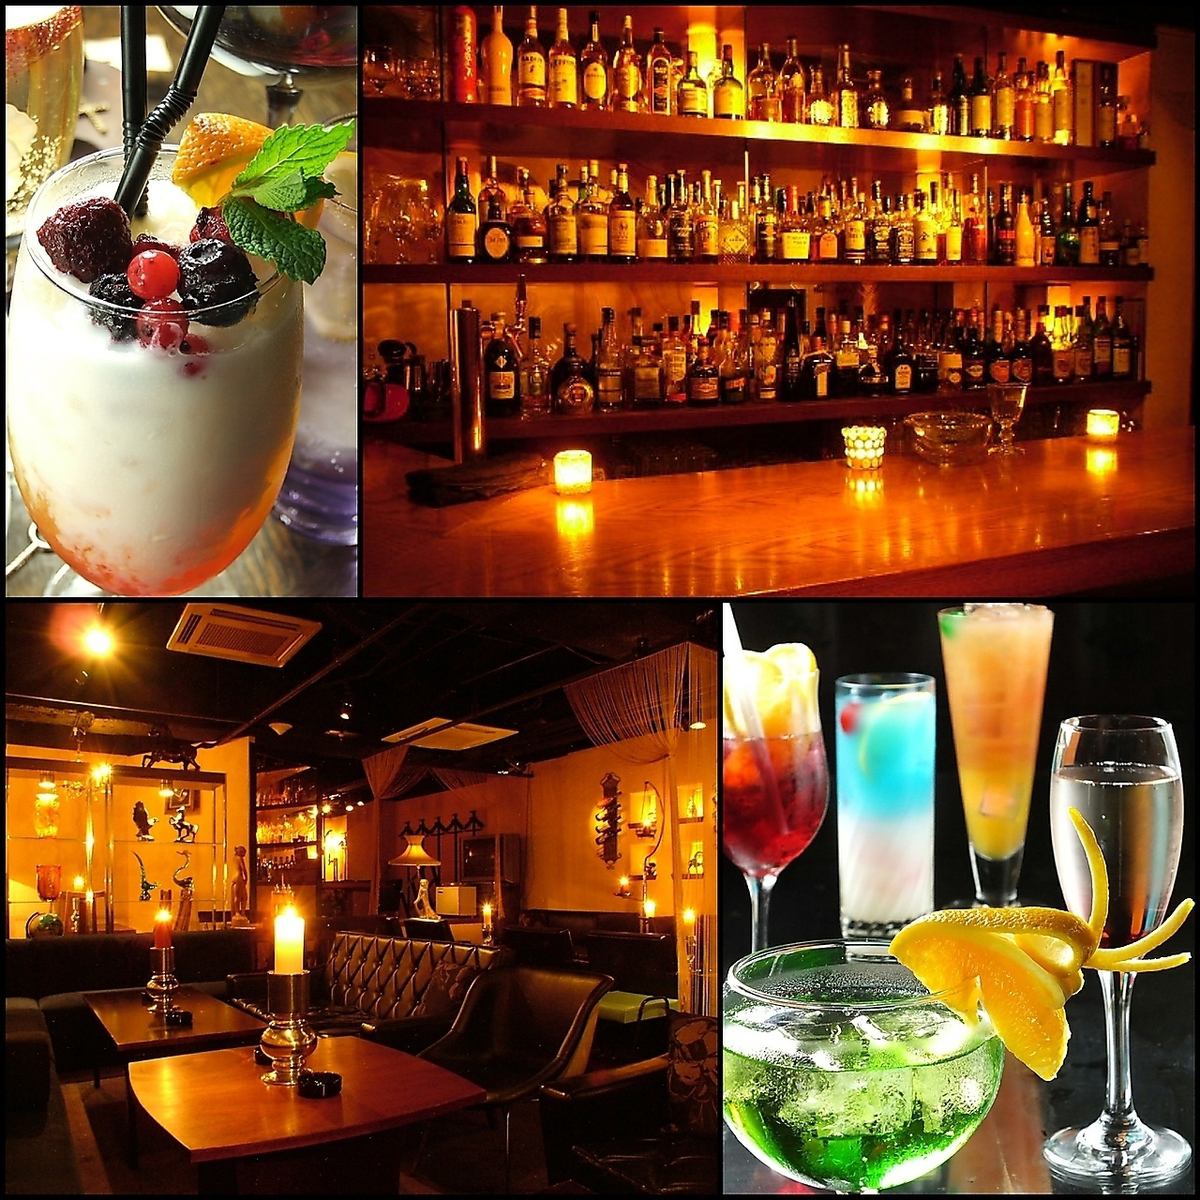 Draft beer, wine, and full cocktails [all-you-can-drink] plan available for 2,600 yen!